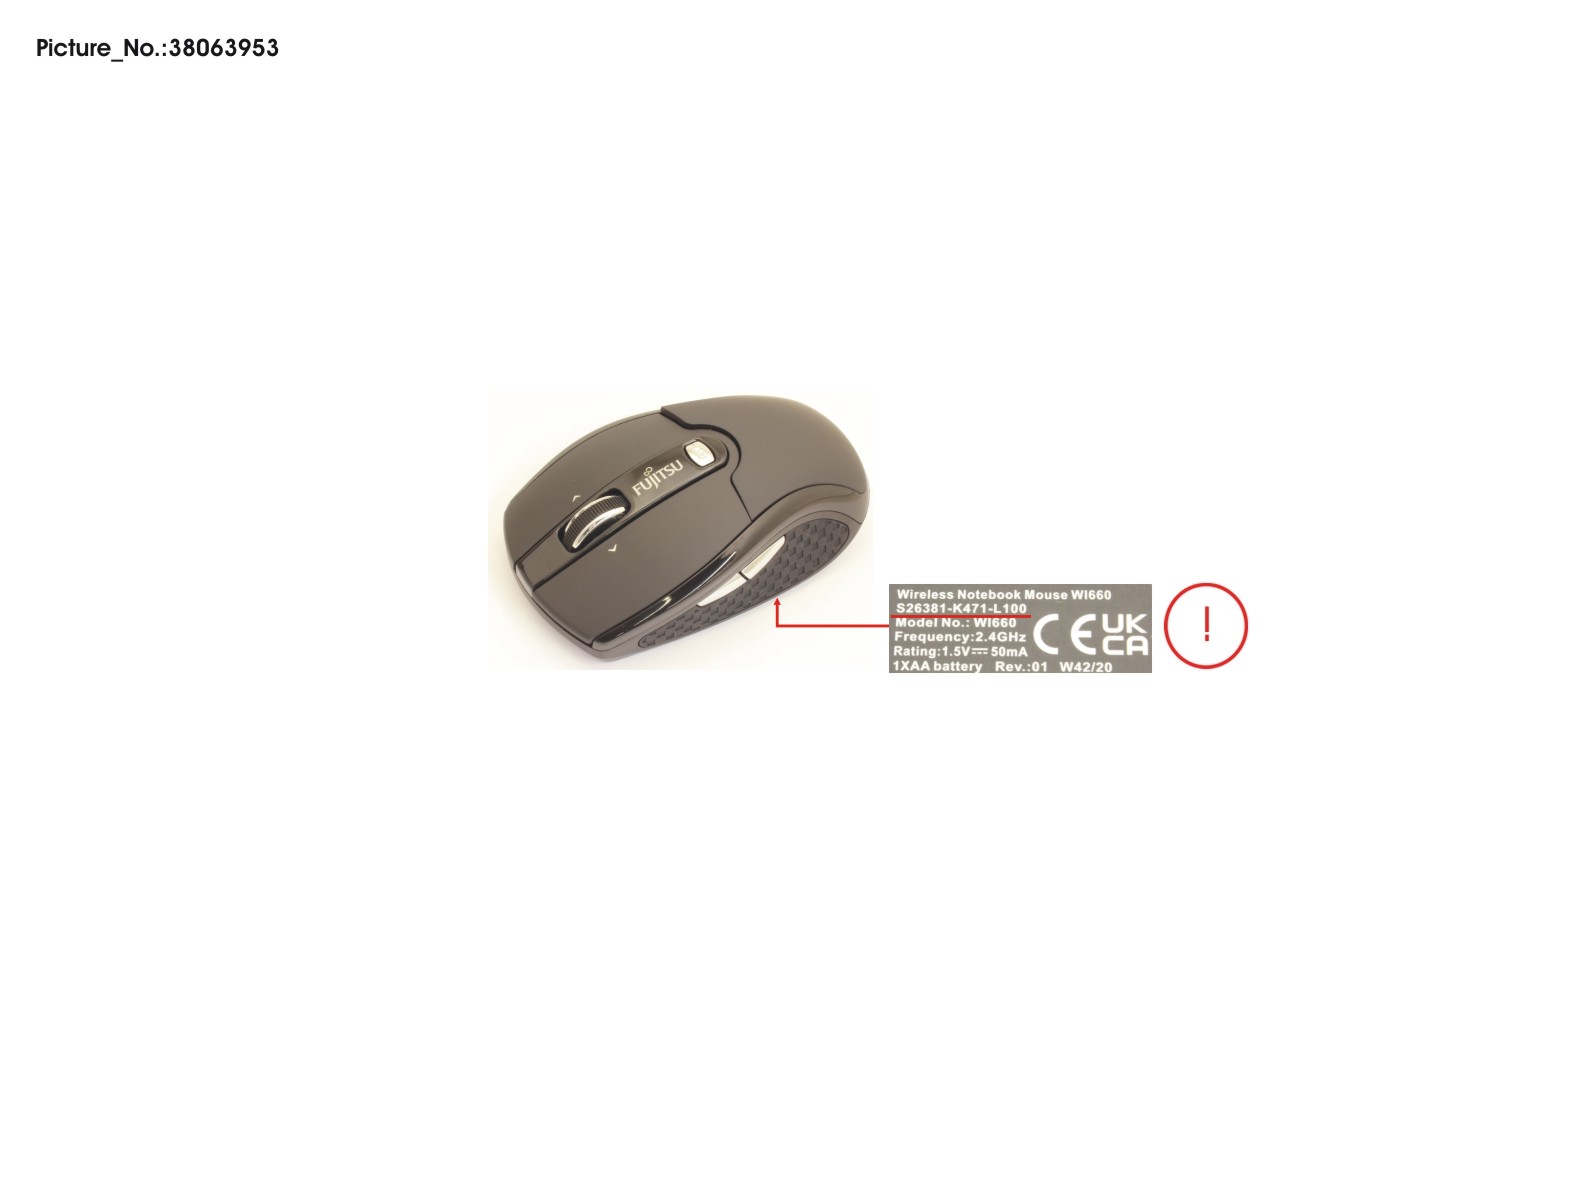 WIRELESS NOTEBOOK MOUSE WI660